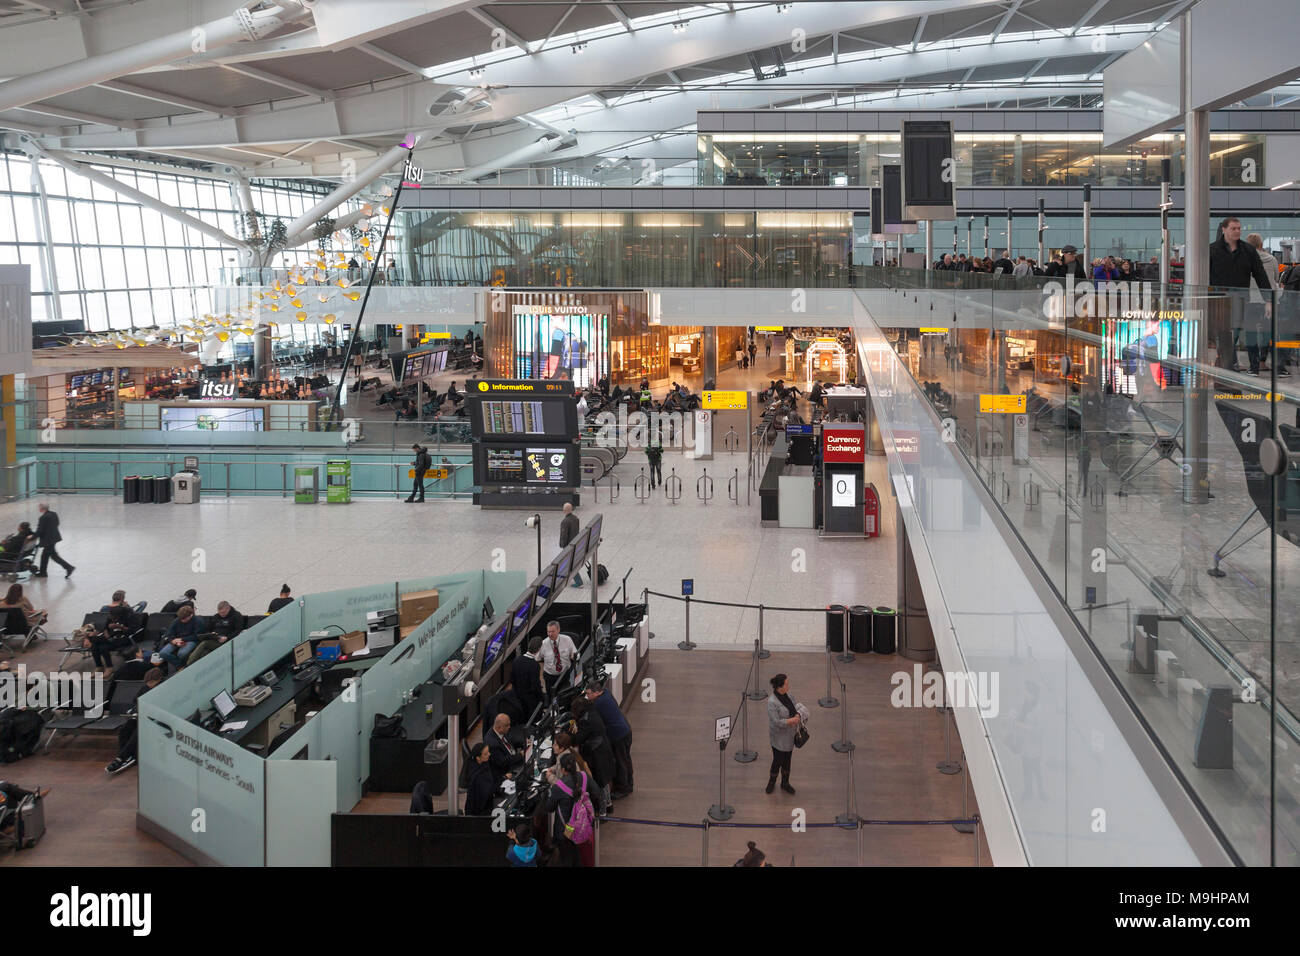 Part of the Terminal Five Departures Concourse at Heathrow Airport, London, with passengers, Customer service desk and staff, itsu fast food outlet, Stock Photo